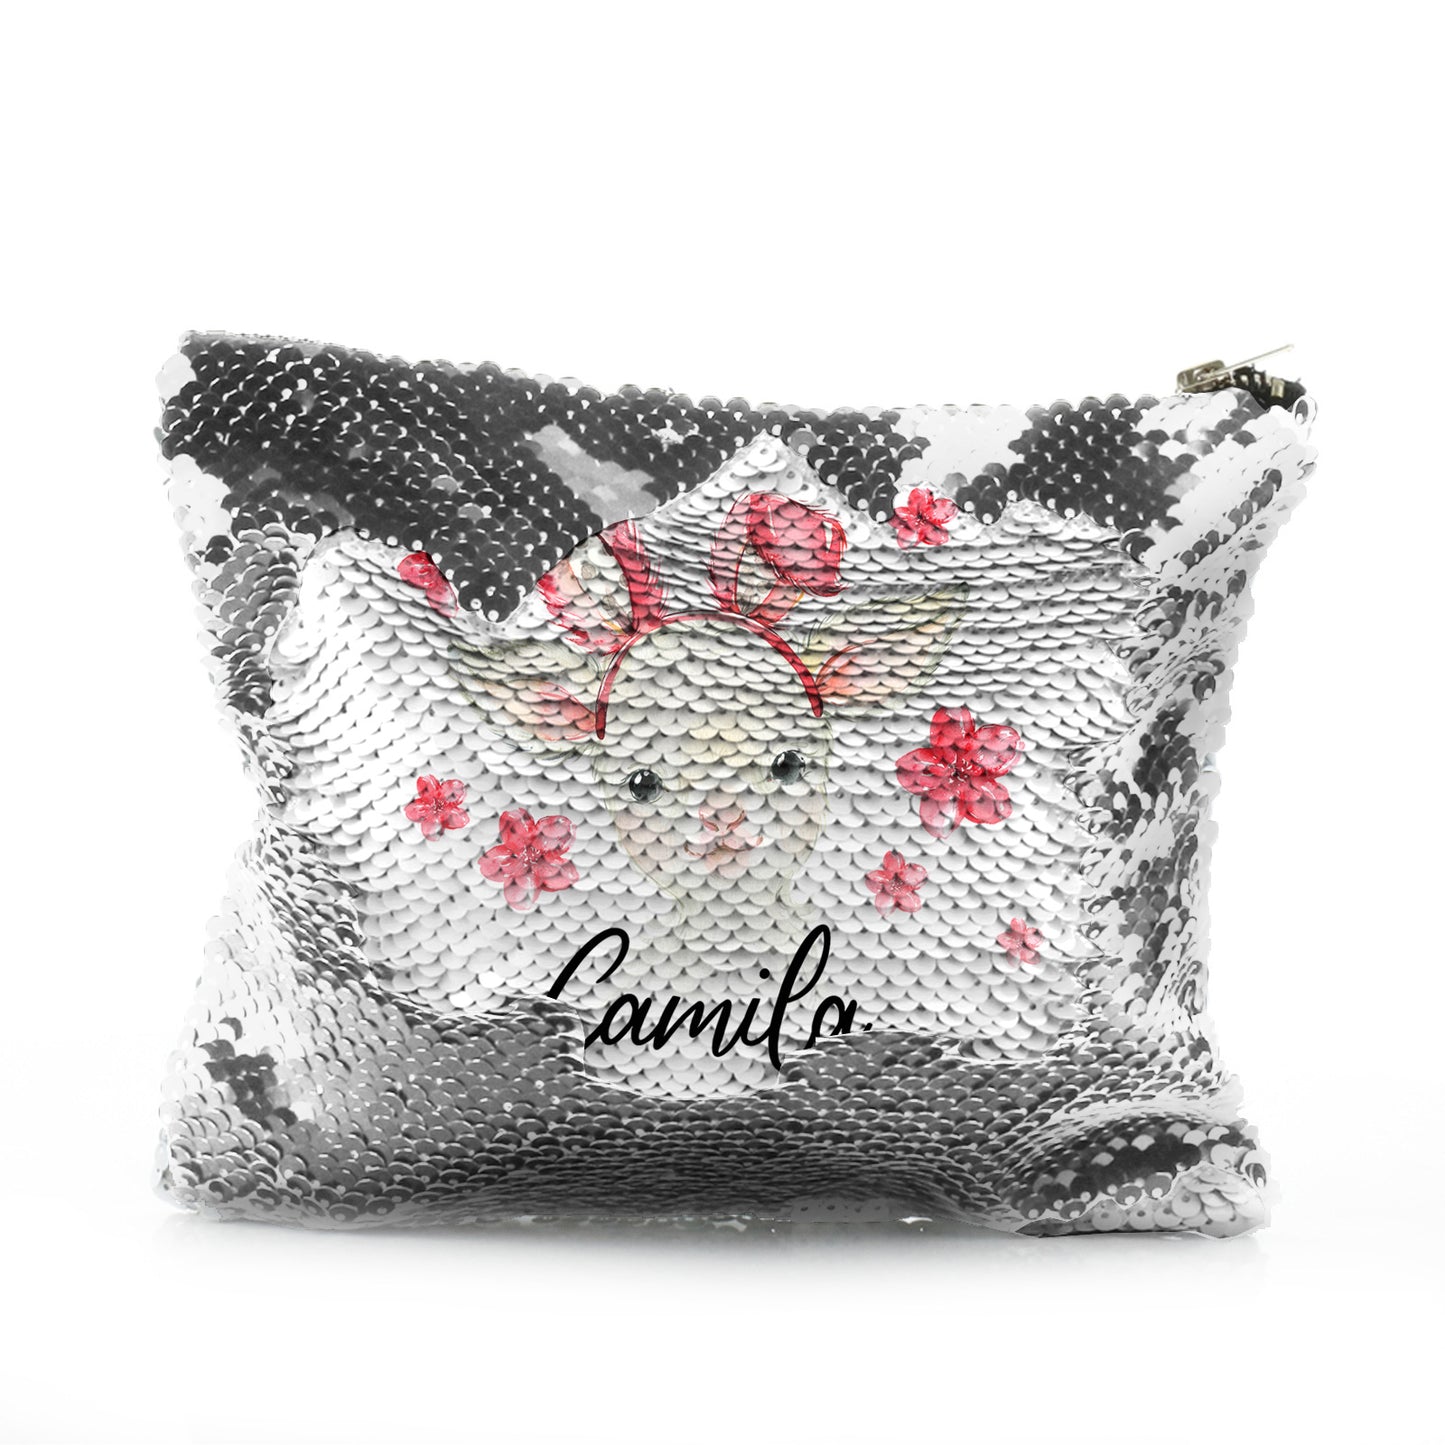 Personalised Sequin Zip Bag with White Lamb Pink Bunny Ears and Flowers and Cute Text